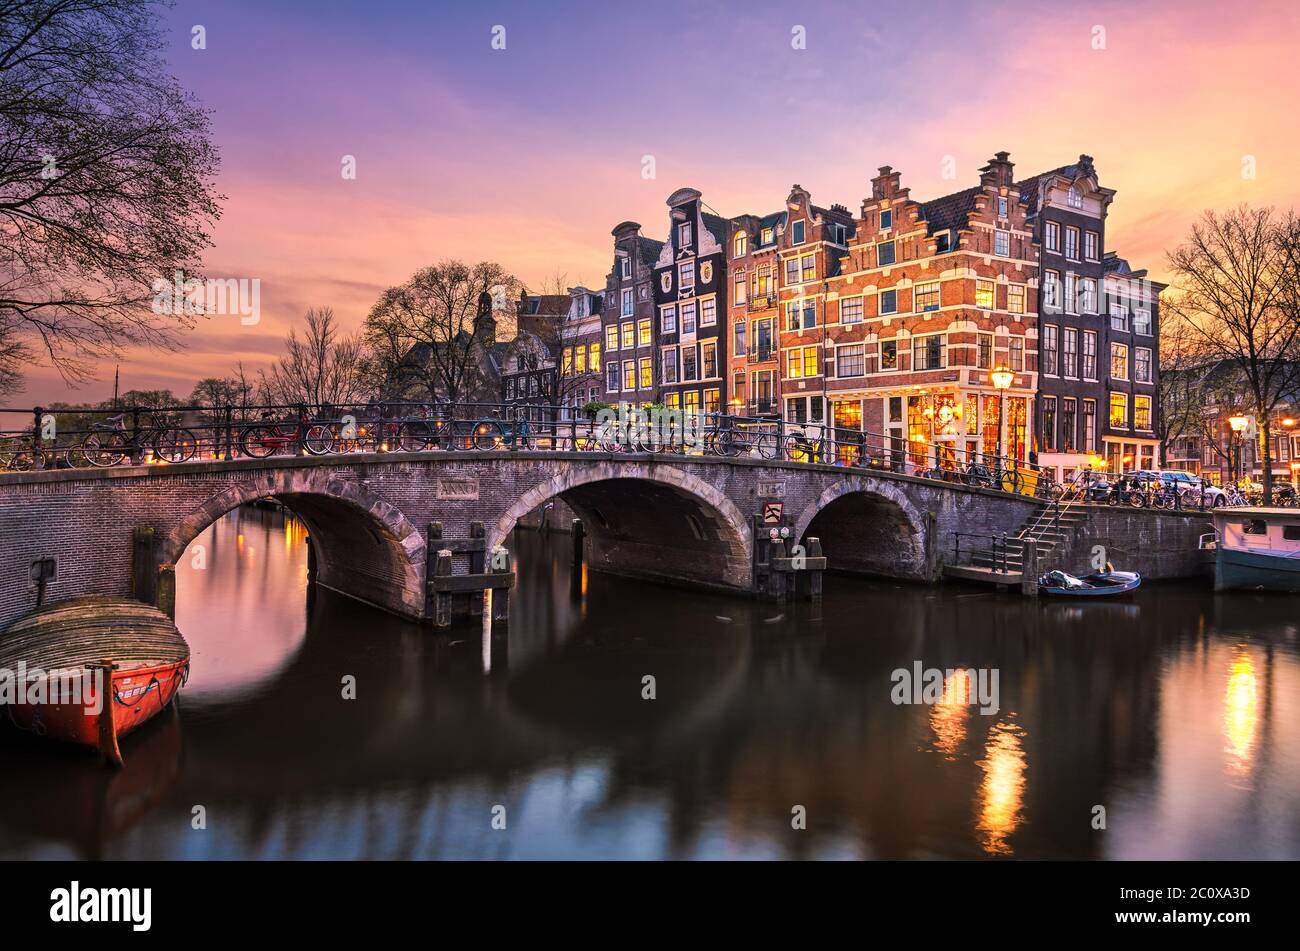 Sunset at the Brouwersgracht in Amsterdam, Netherlands Stock Photo